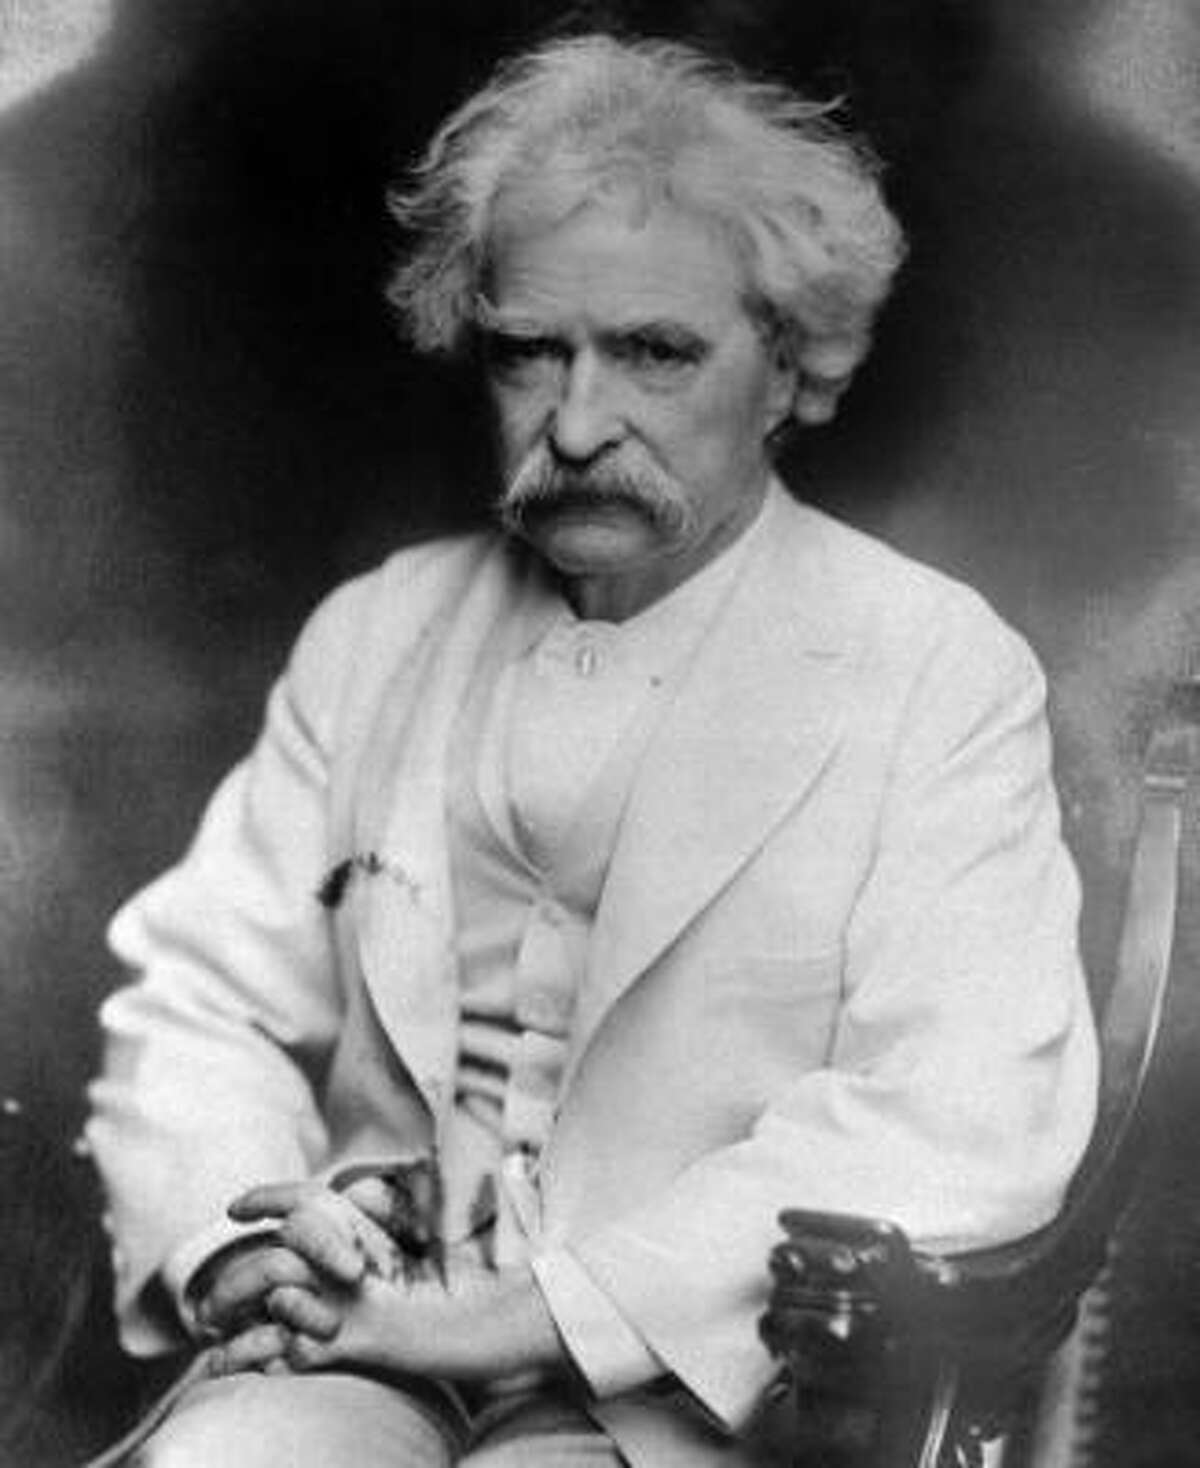 Samuel Langhorne Clemens, better known under his pen name, Mark Twain, ﻿ wrote such classics as "Adventures of Huckleberry Finn" and "The Adventures of Tom Sawyer."